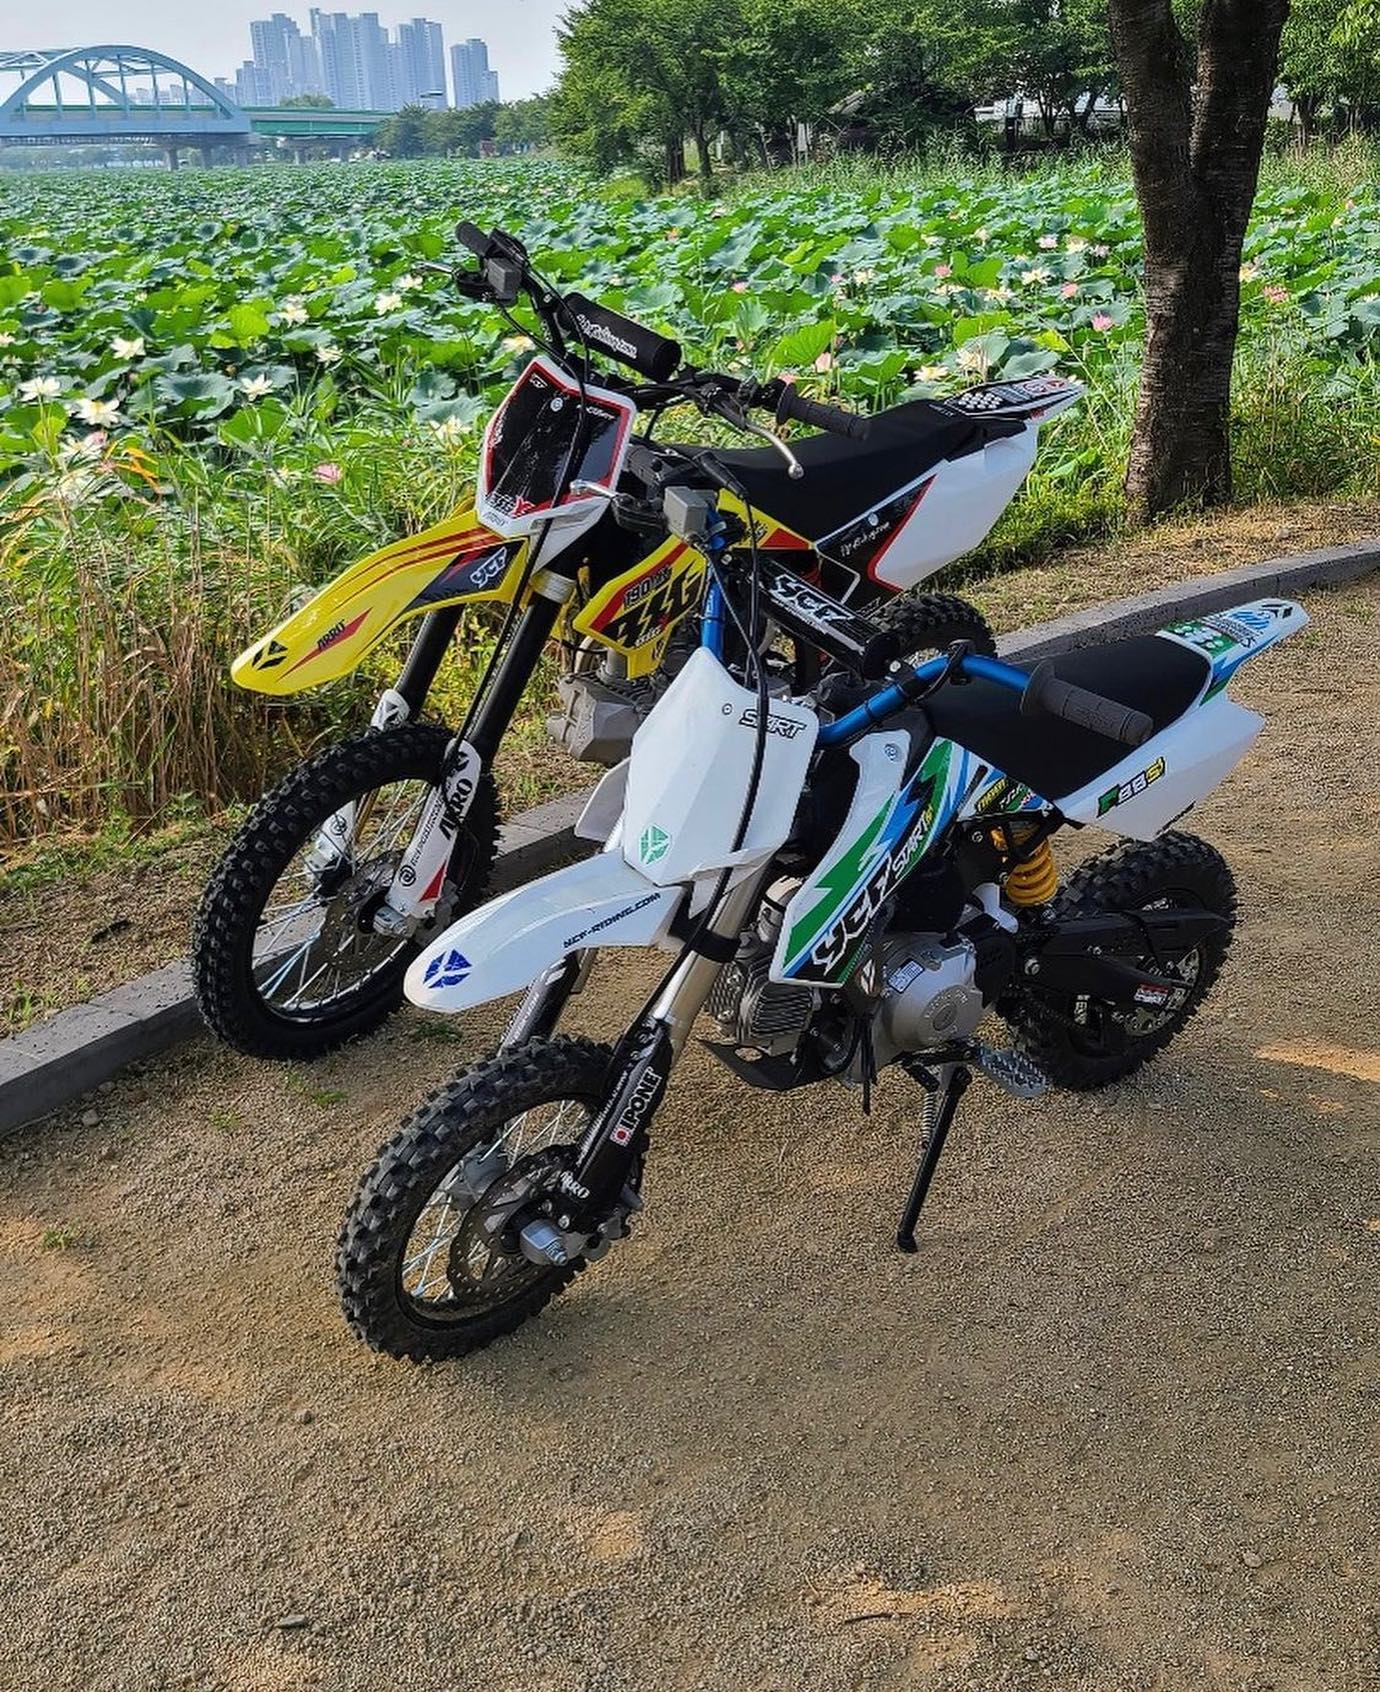 Ready for a father & son ride 🤩✊️
—
#ycf #moto #motocross #motorcycle